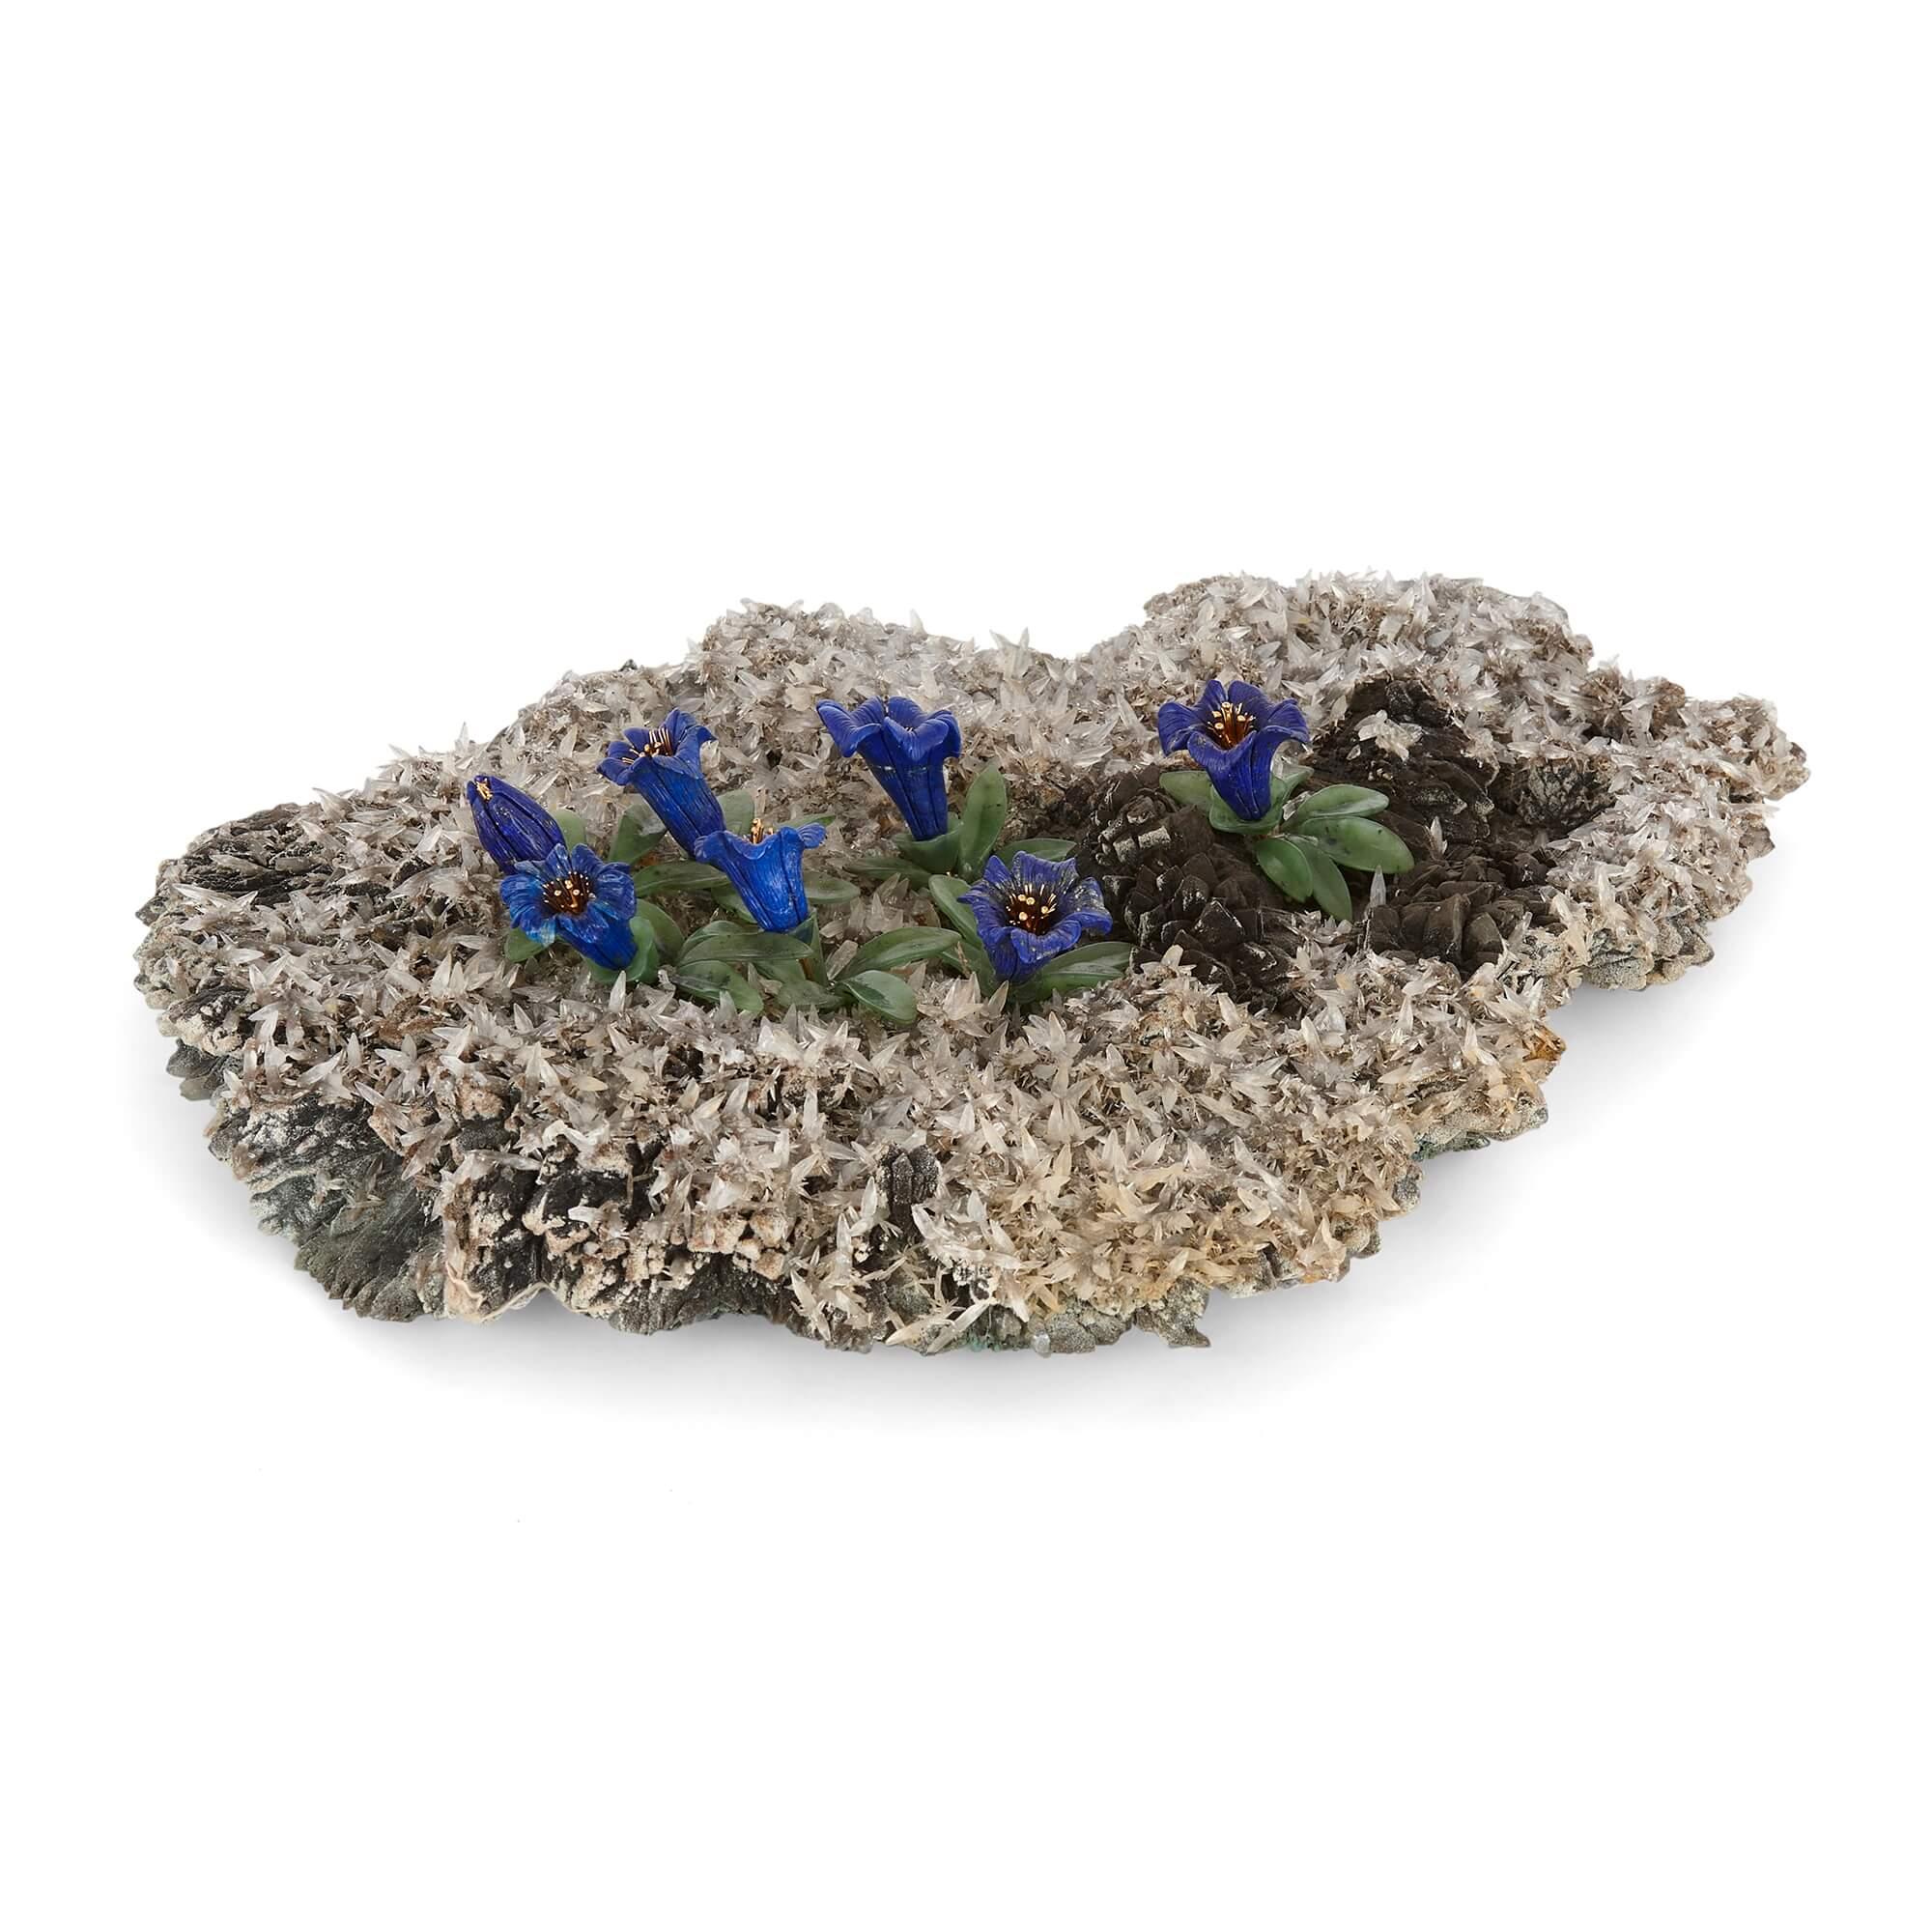 Large hardstone, quartz, gold, nephrite and lapis lazuli model of an alpine flower bed
Continental, 20th Century
Measures: Height 7cm, width 37cm, depth 27cm

A beautiful objet d'art, this exceptionally fine flower bed model is a 20th century